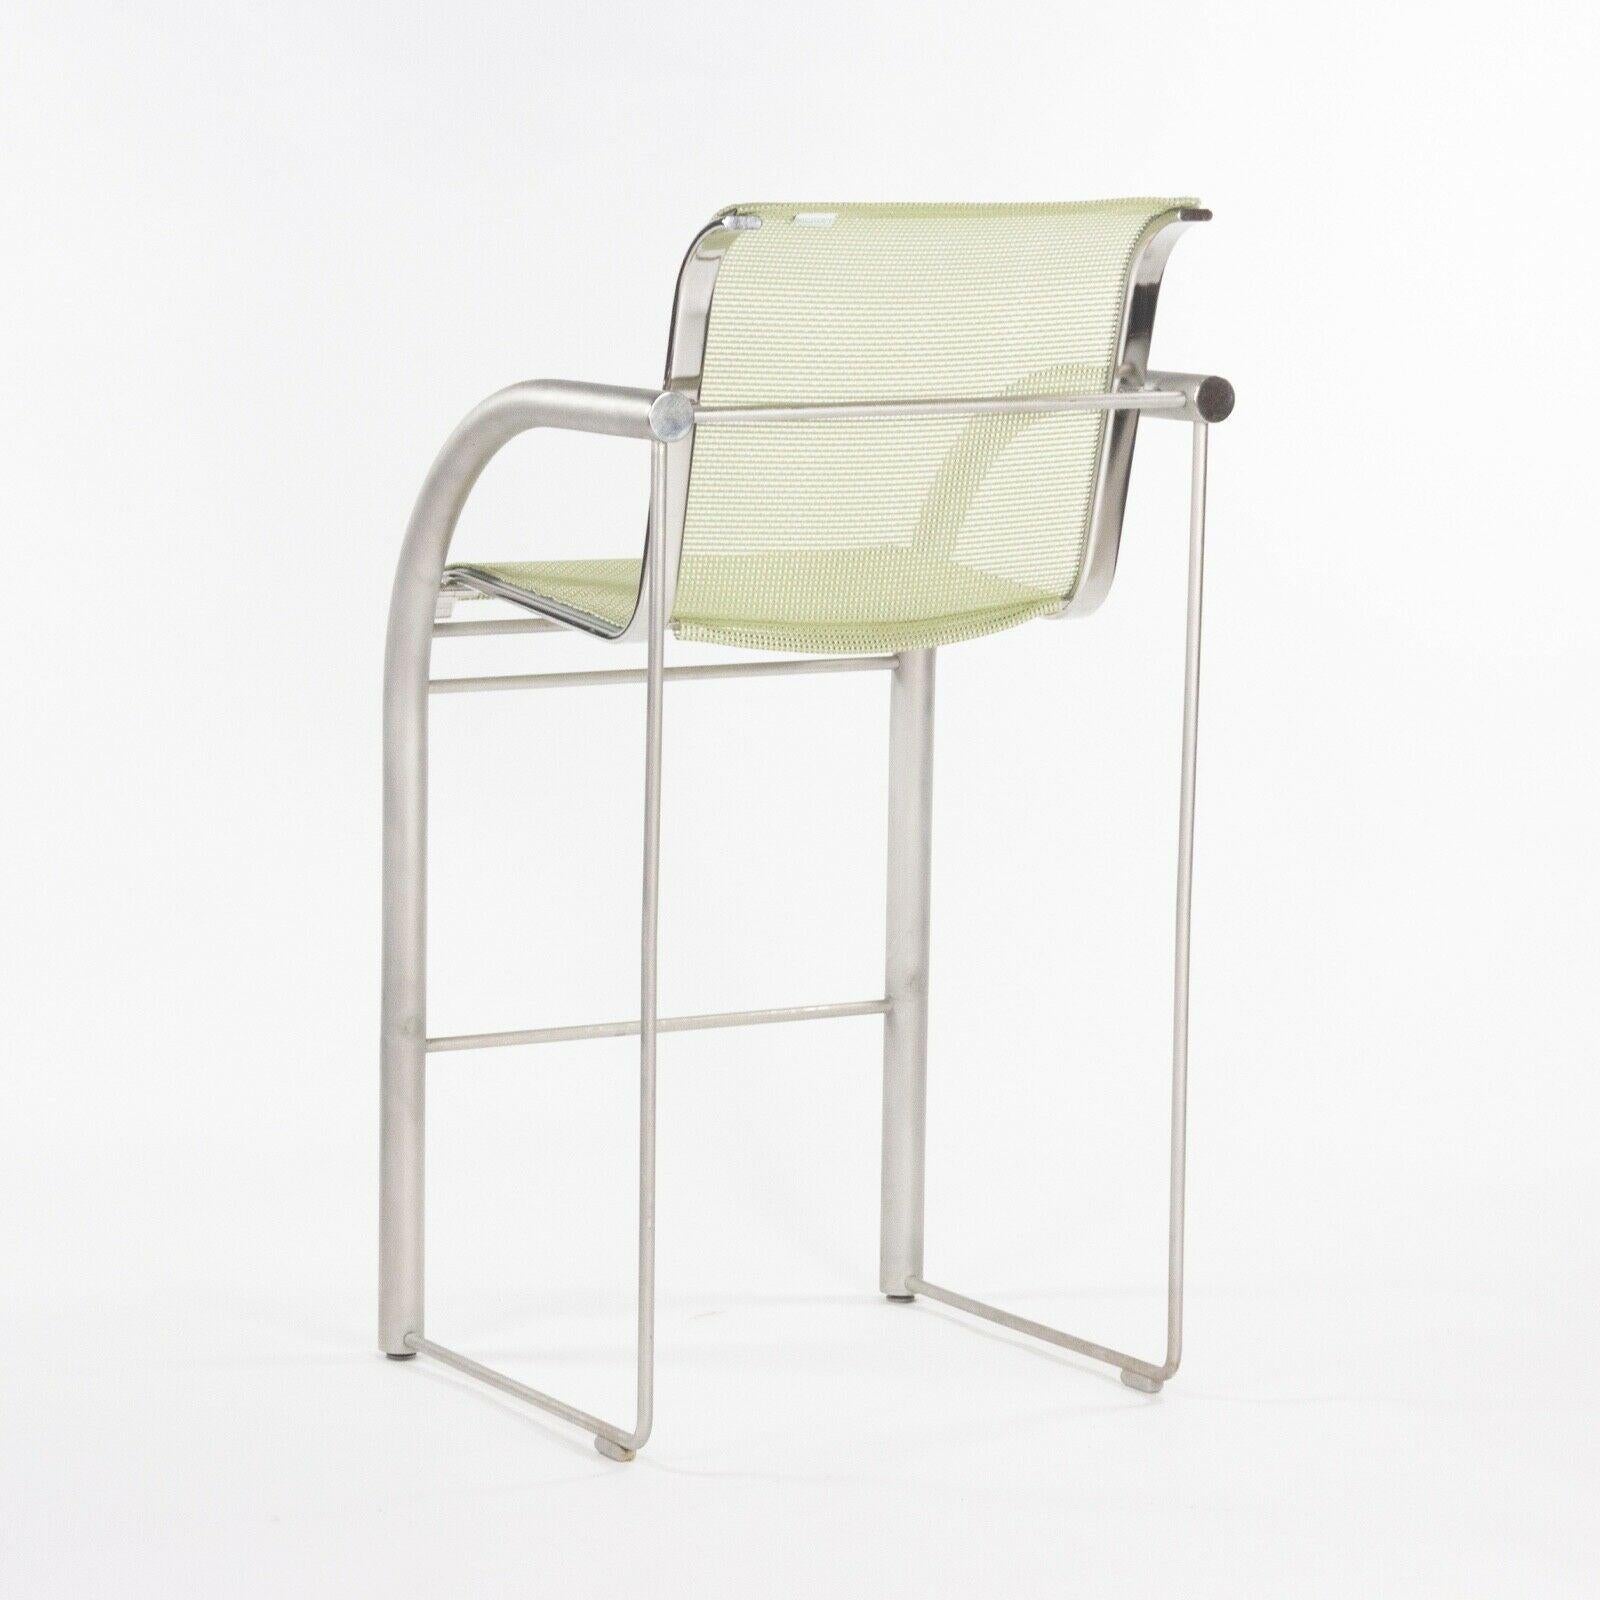 Steel Prototype Richard Schultz 2002 Collection Stainless Bar Stool with Outdoor Mesh